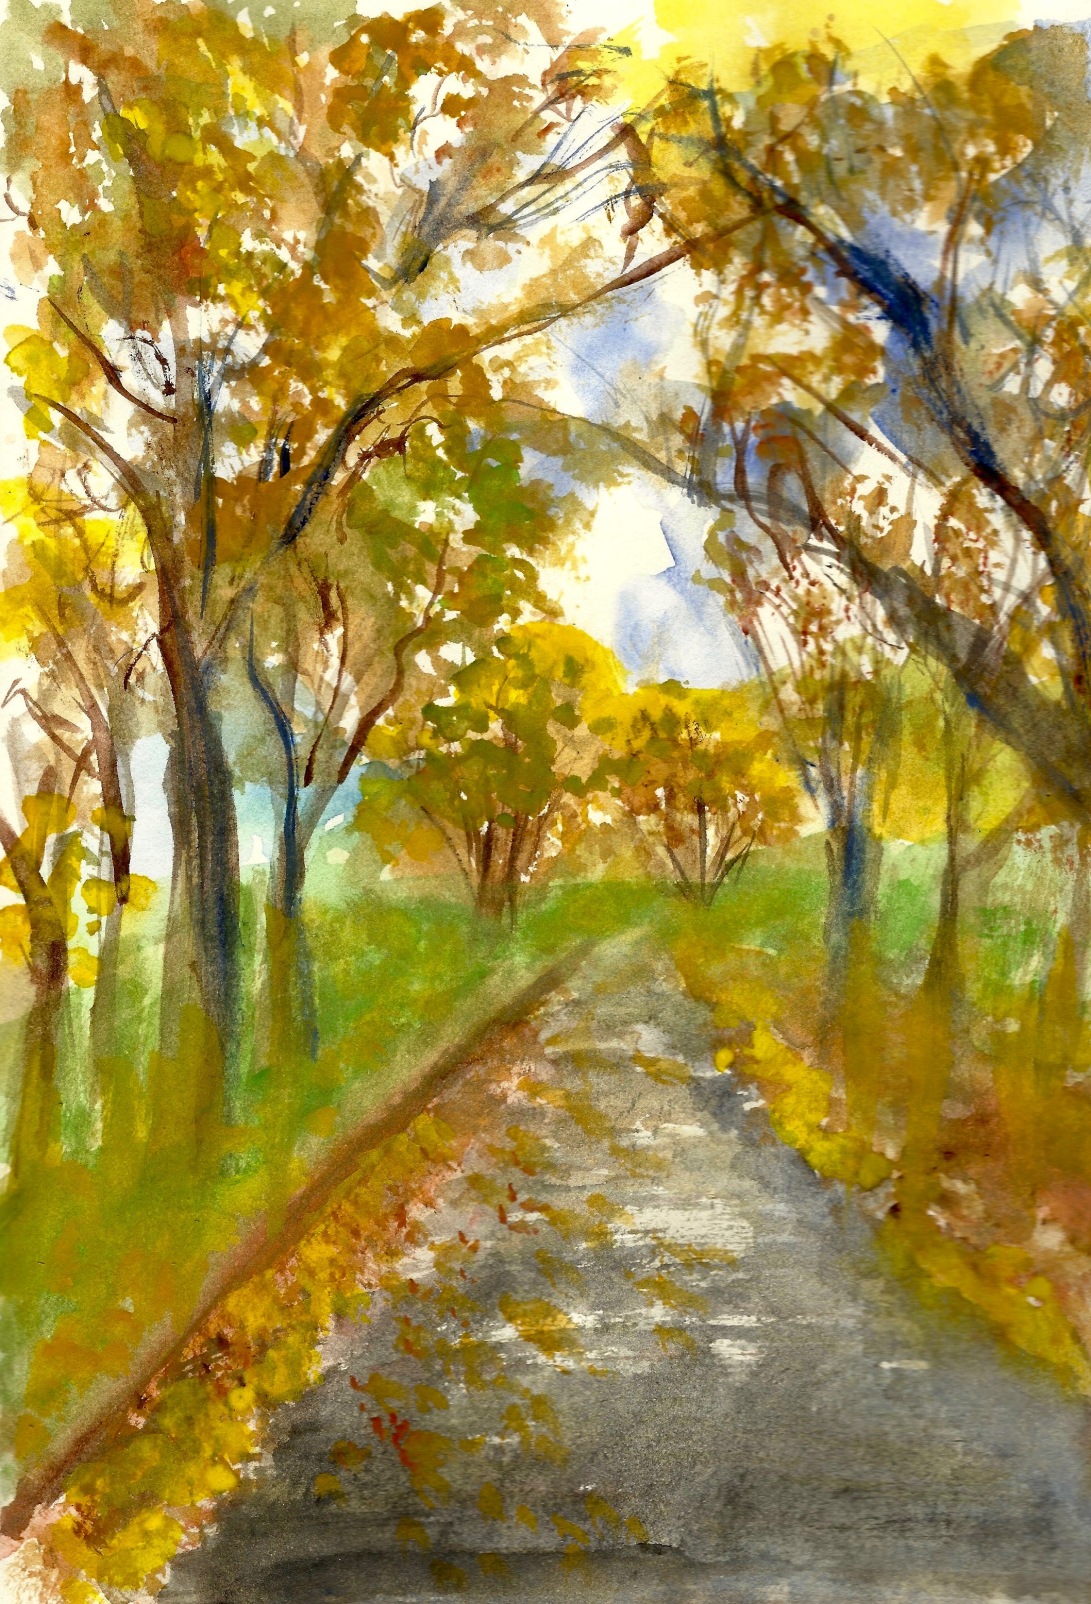 The Street With The Yellow Trees, C. Maniglia 2015 - watercolor in journal